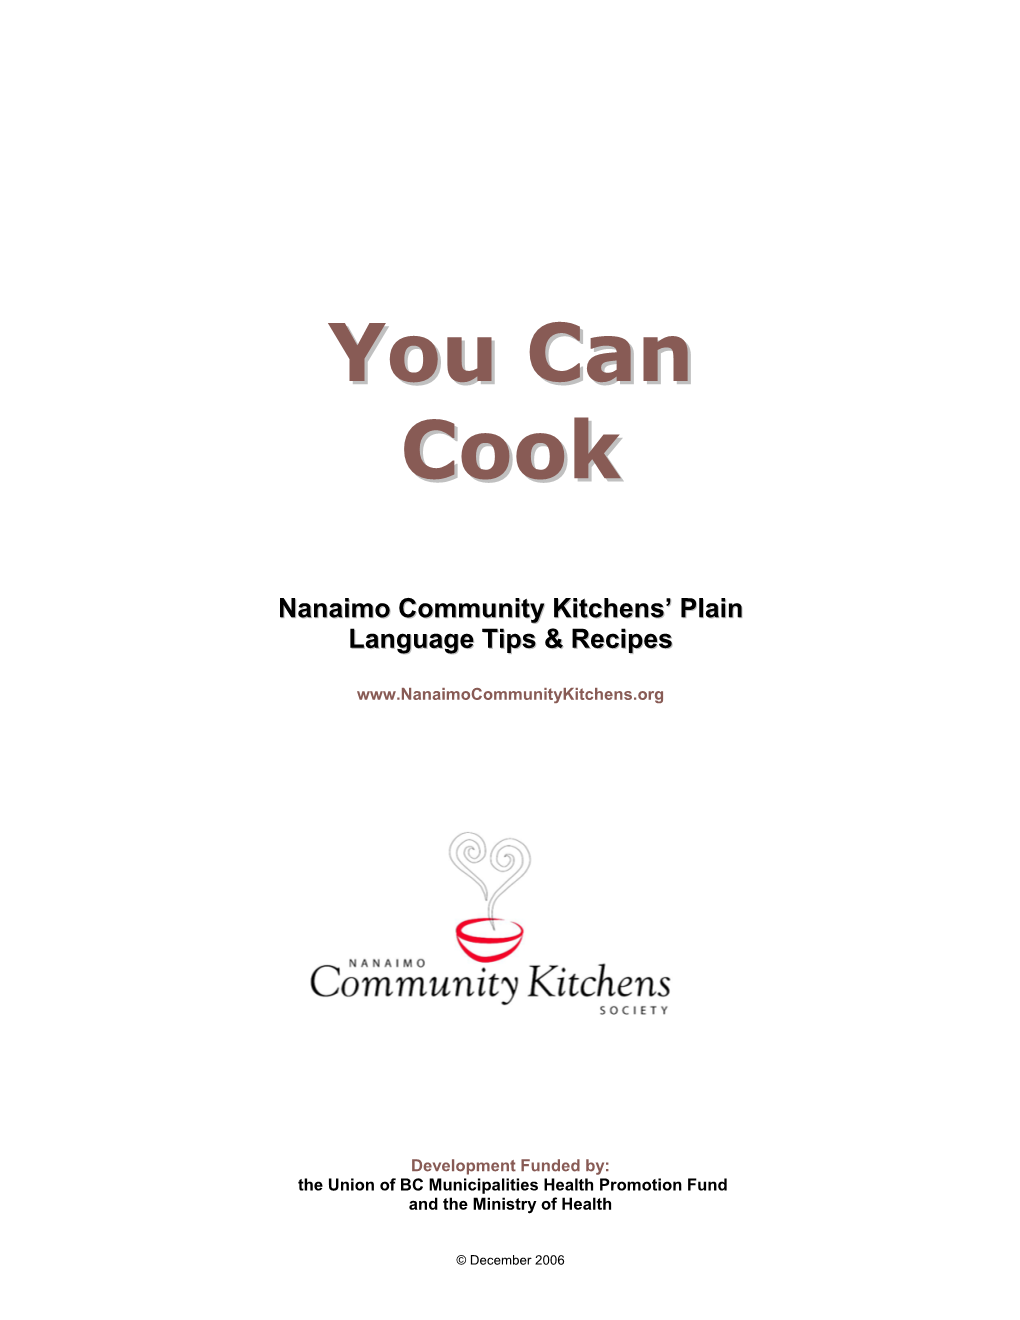 YOU CAN COOK Nanaimo Community Kitchens’ Plain Language Tips and Recipes